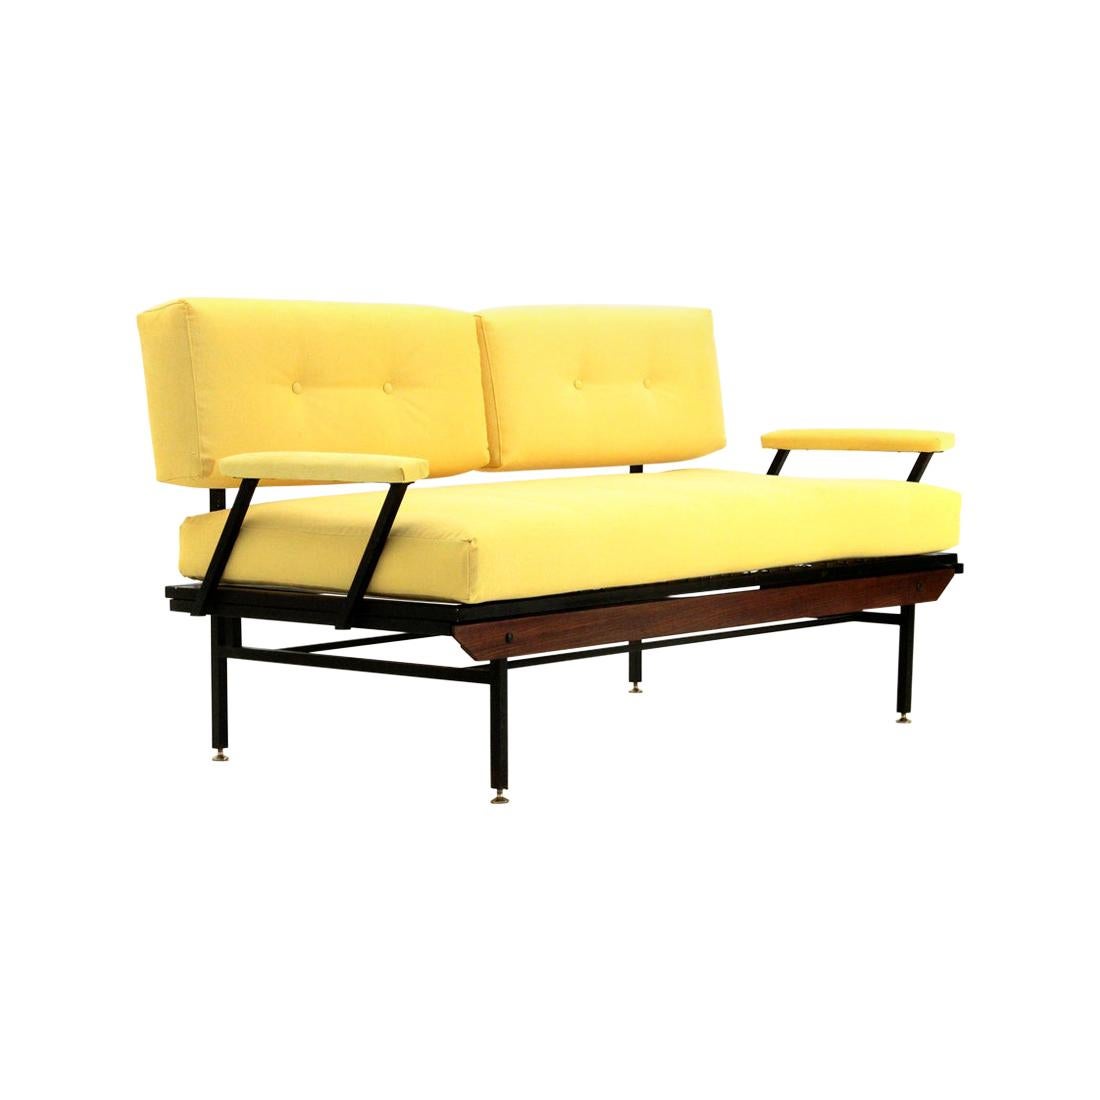 Italian Midcentury Sofa Bed in Yellow Fabric, 1950s For Sale